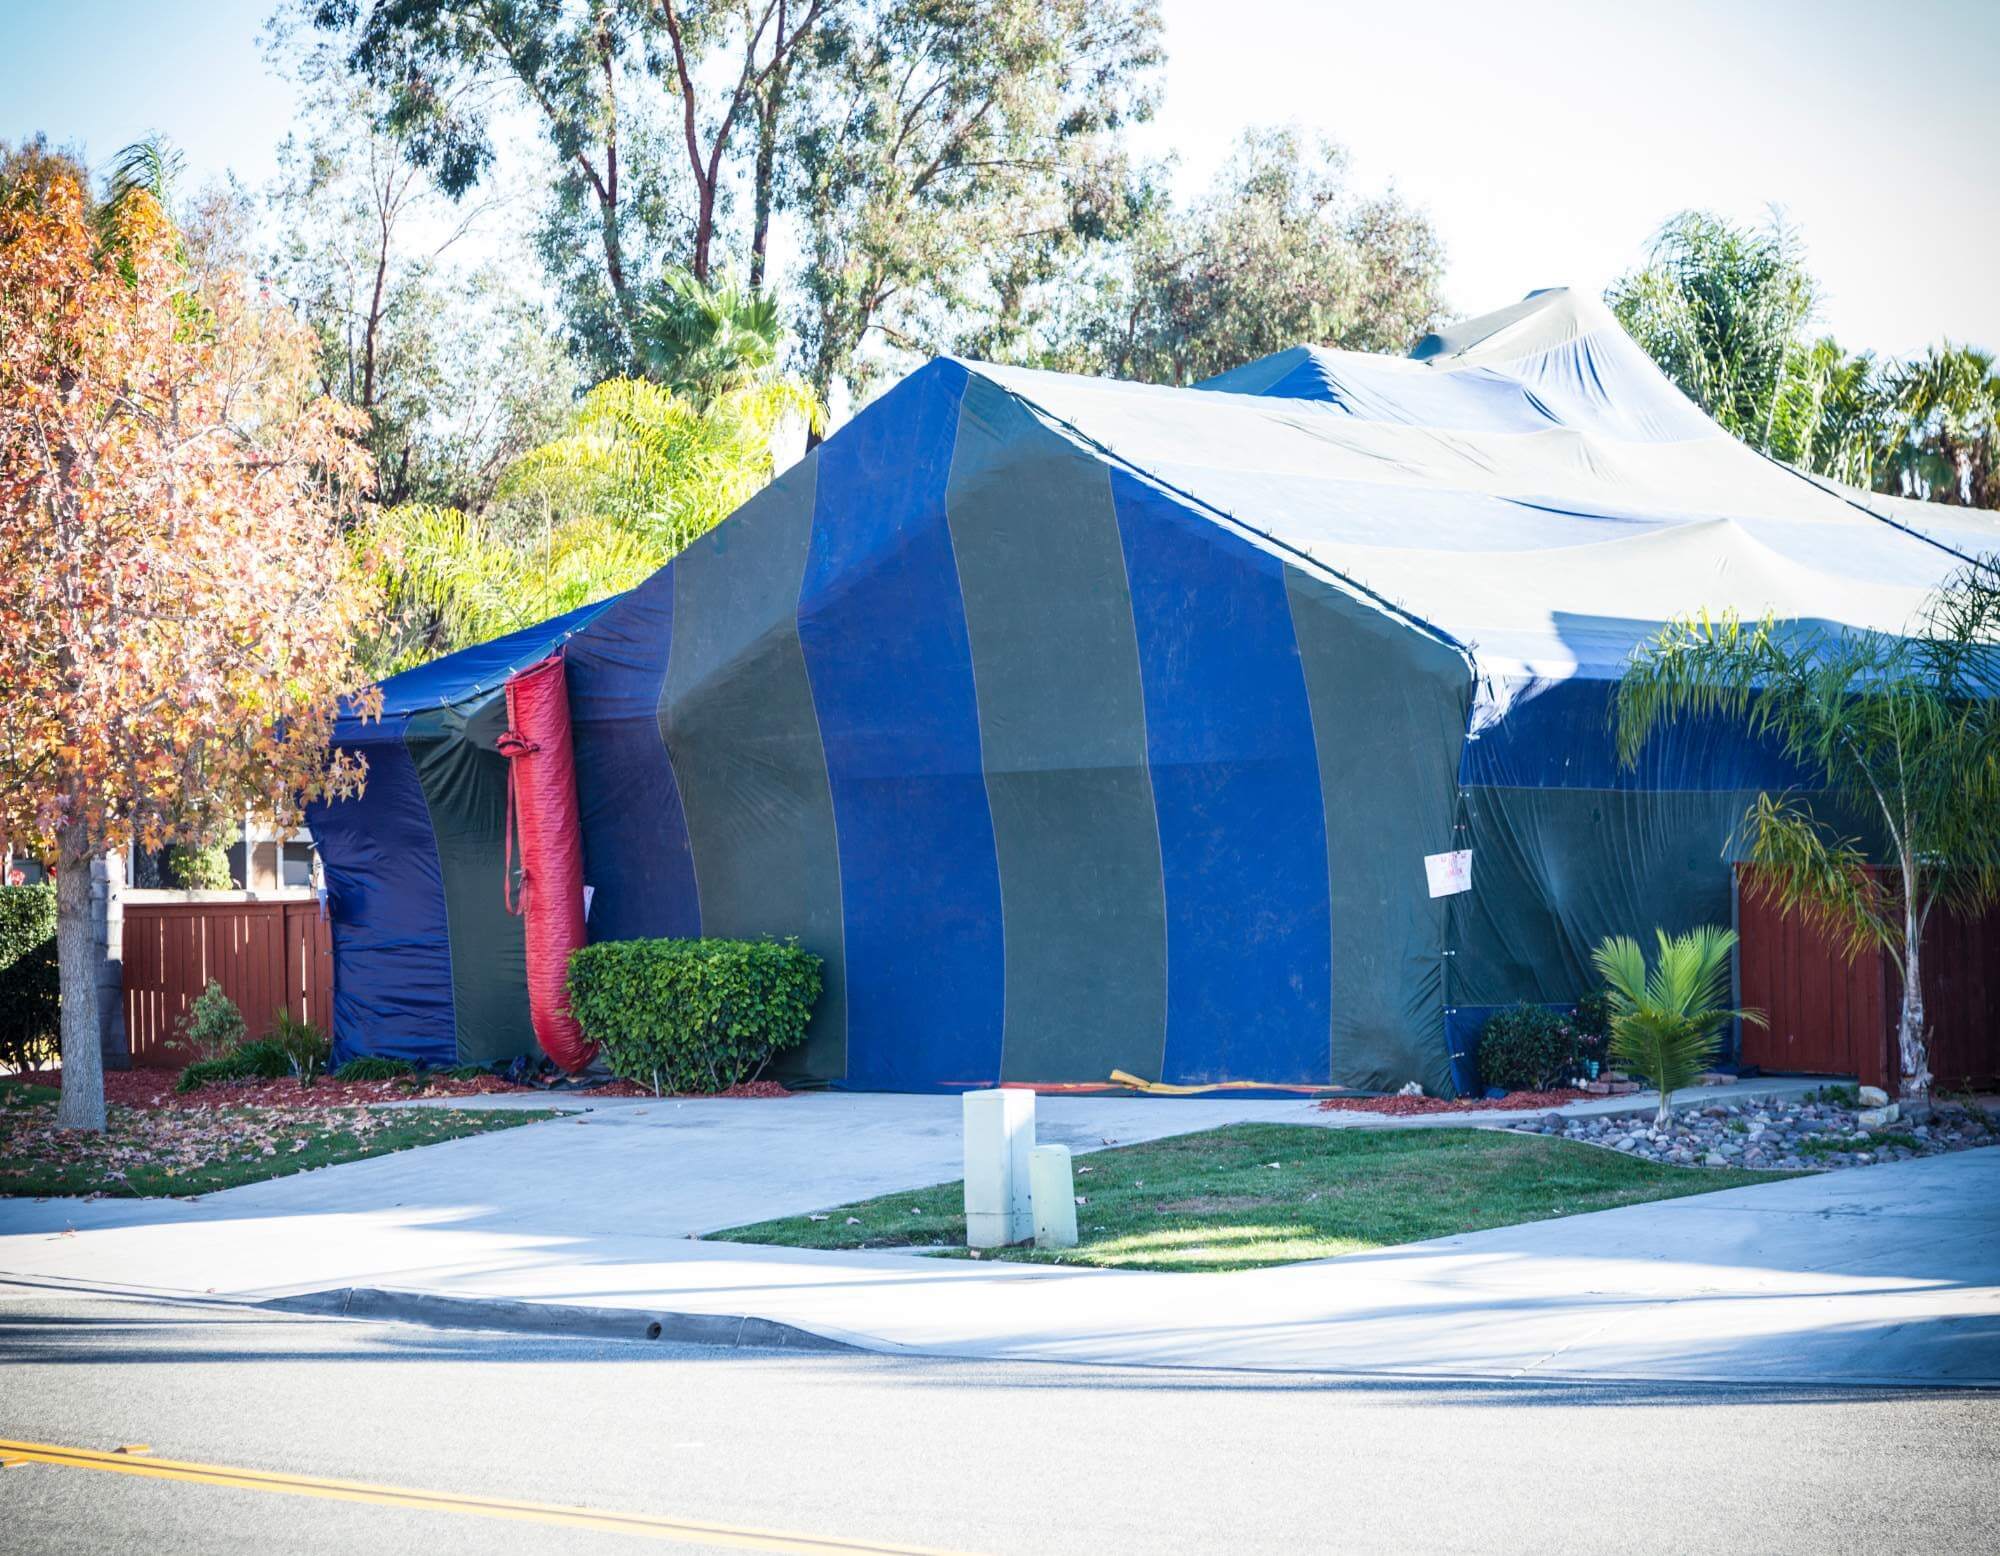 Tented residential home being fumigated for termite infestation